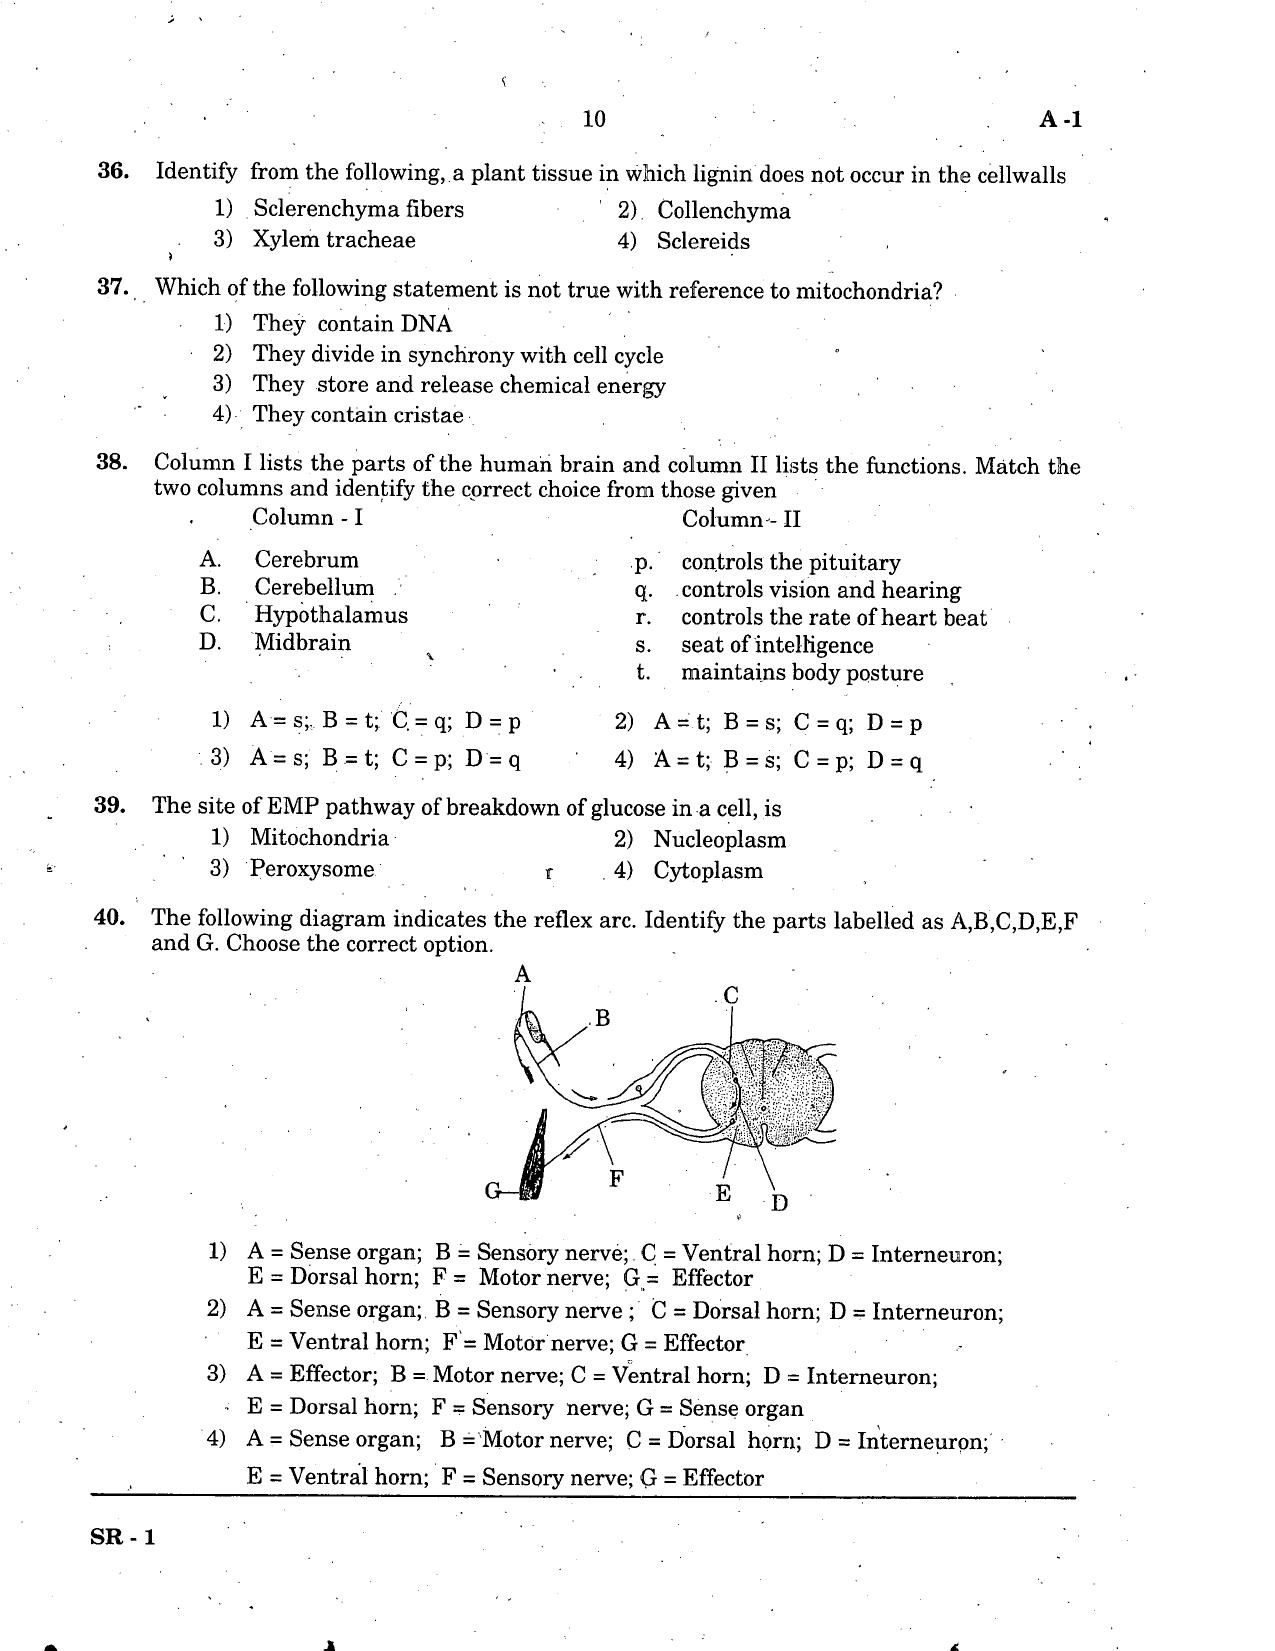 KCET Biology 2005 Question Papers - Page 10